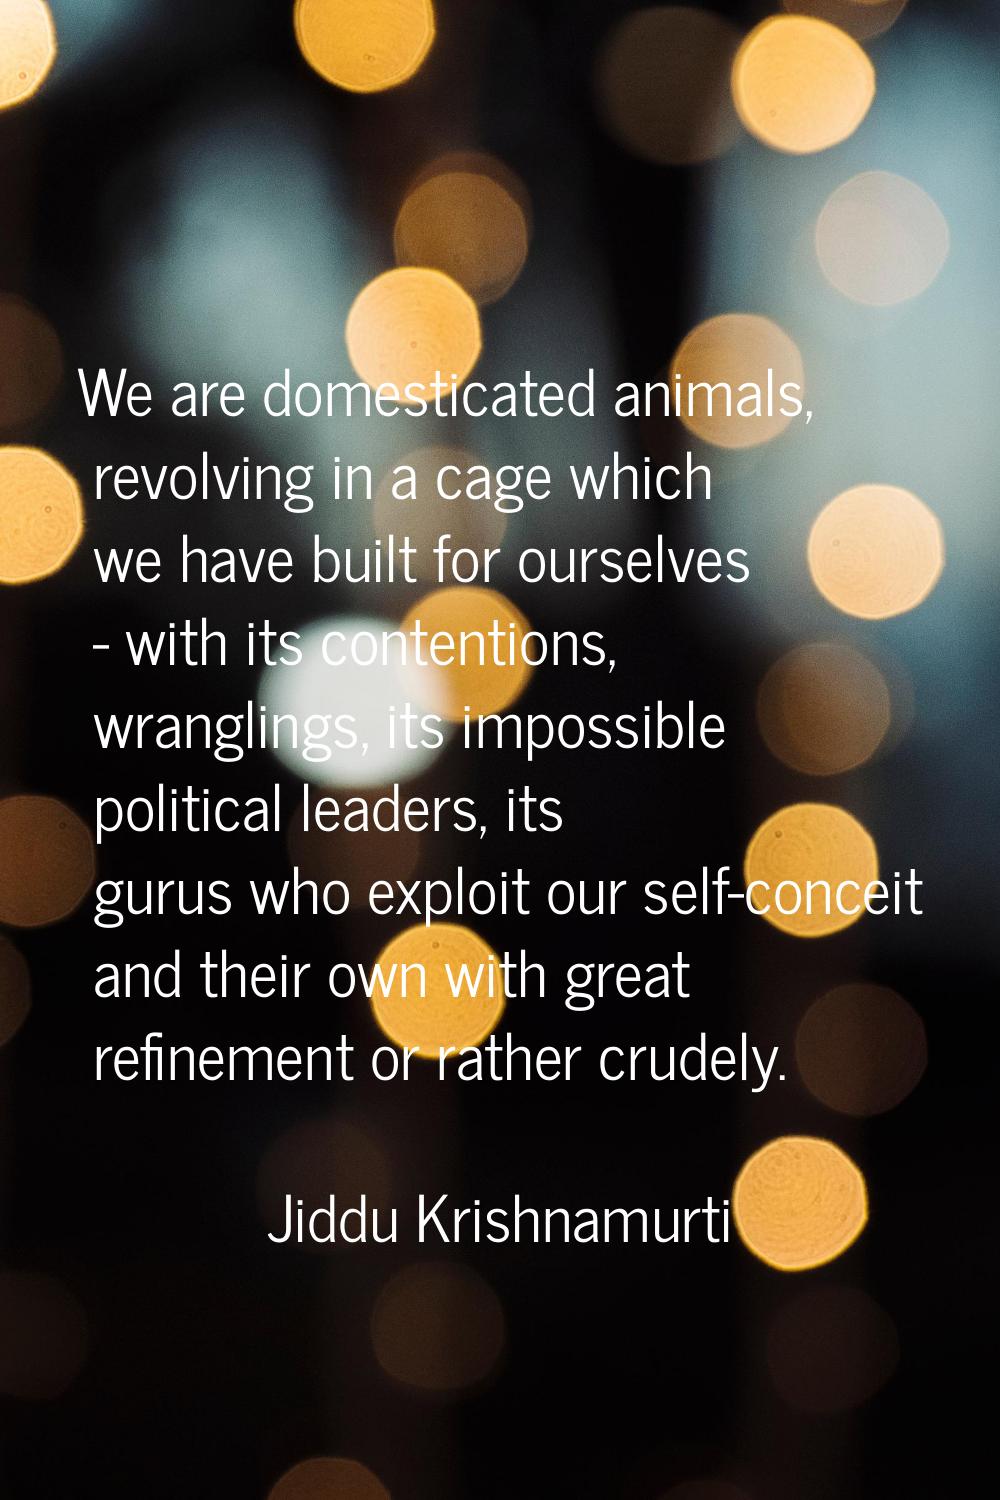 We are domesticated animals, revolving in a cage which we have built for ourselves - with its conte